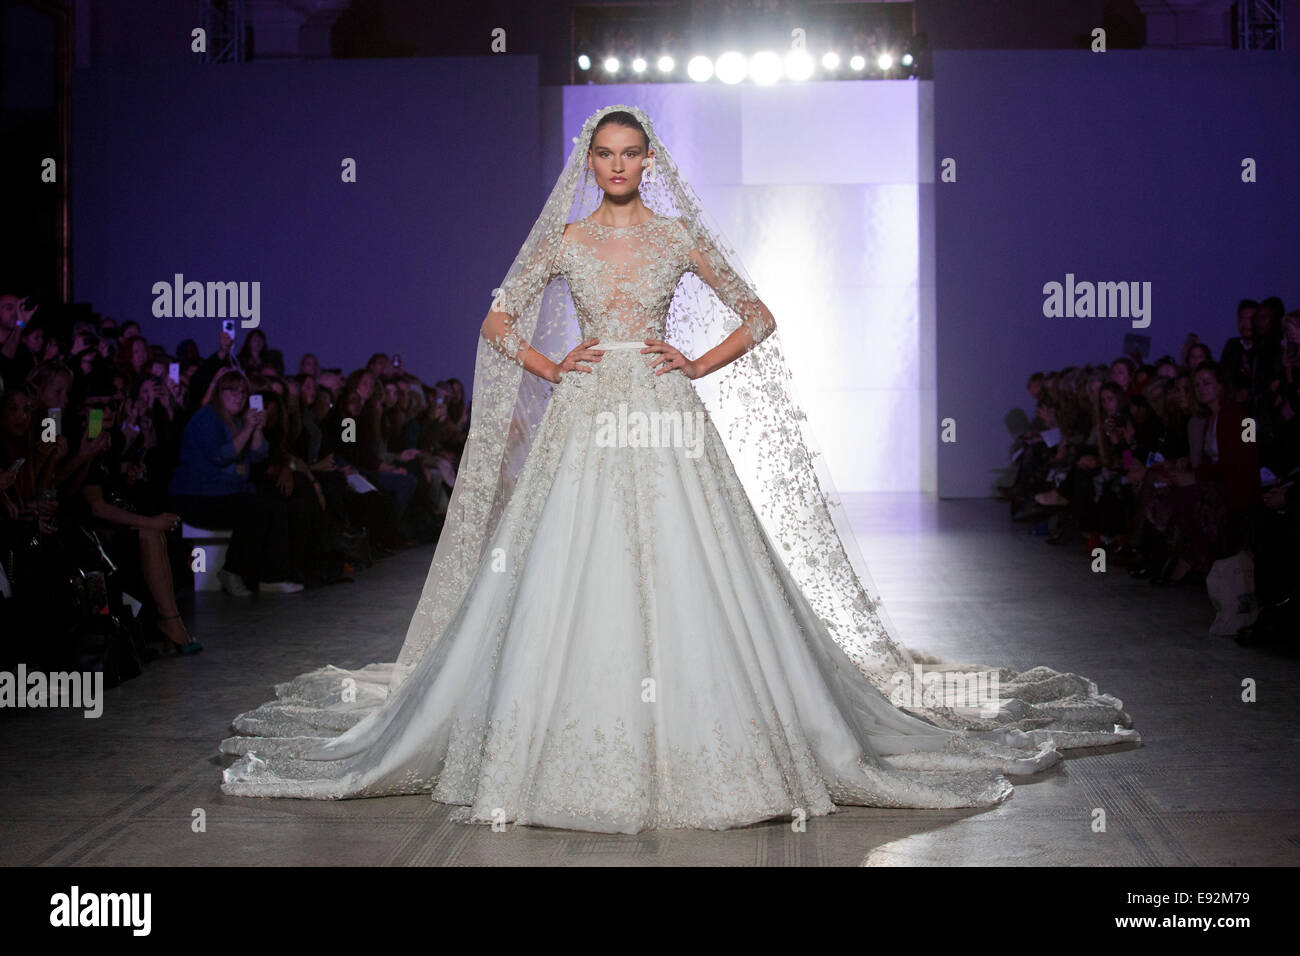 Page 2 - Runway Wedding Show High Resolution Stock Photography and Images -  Alamy